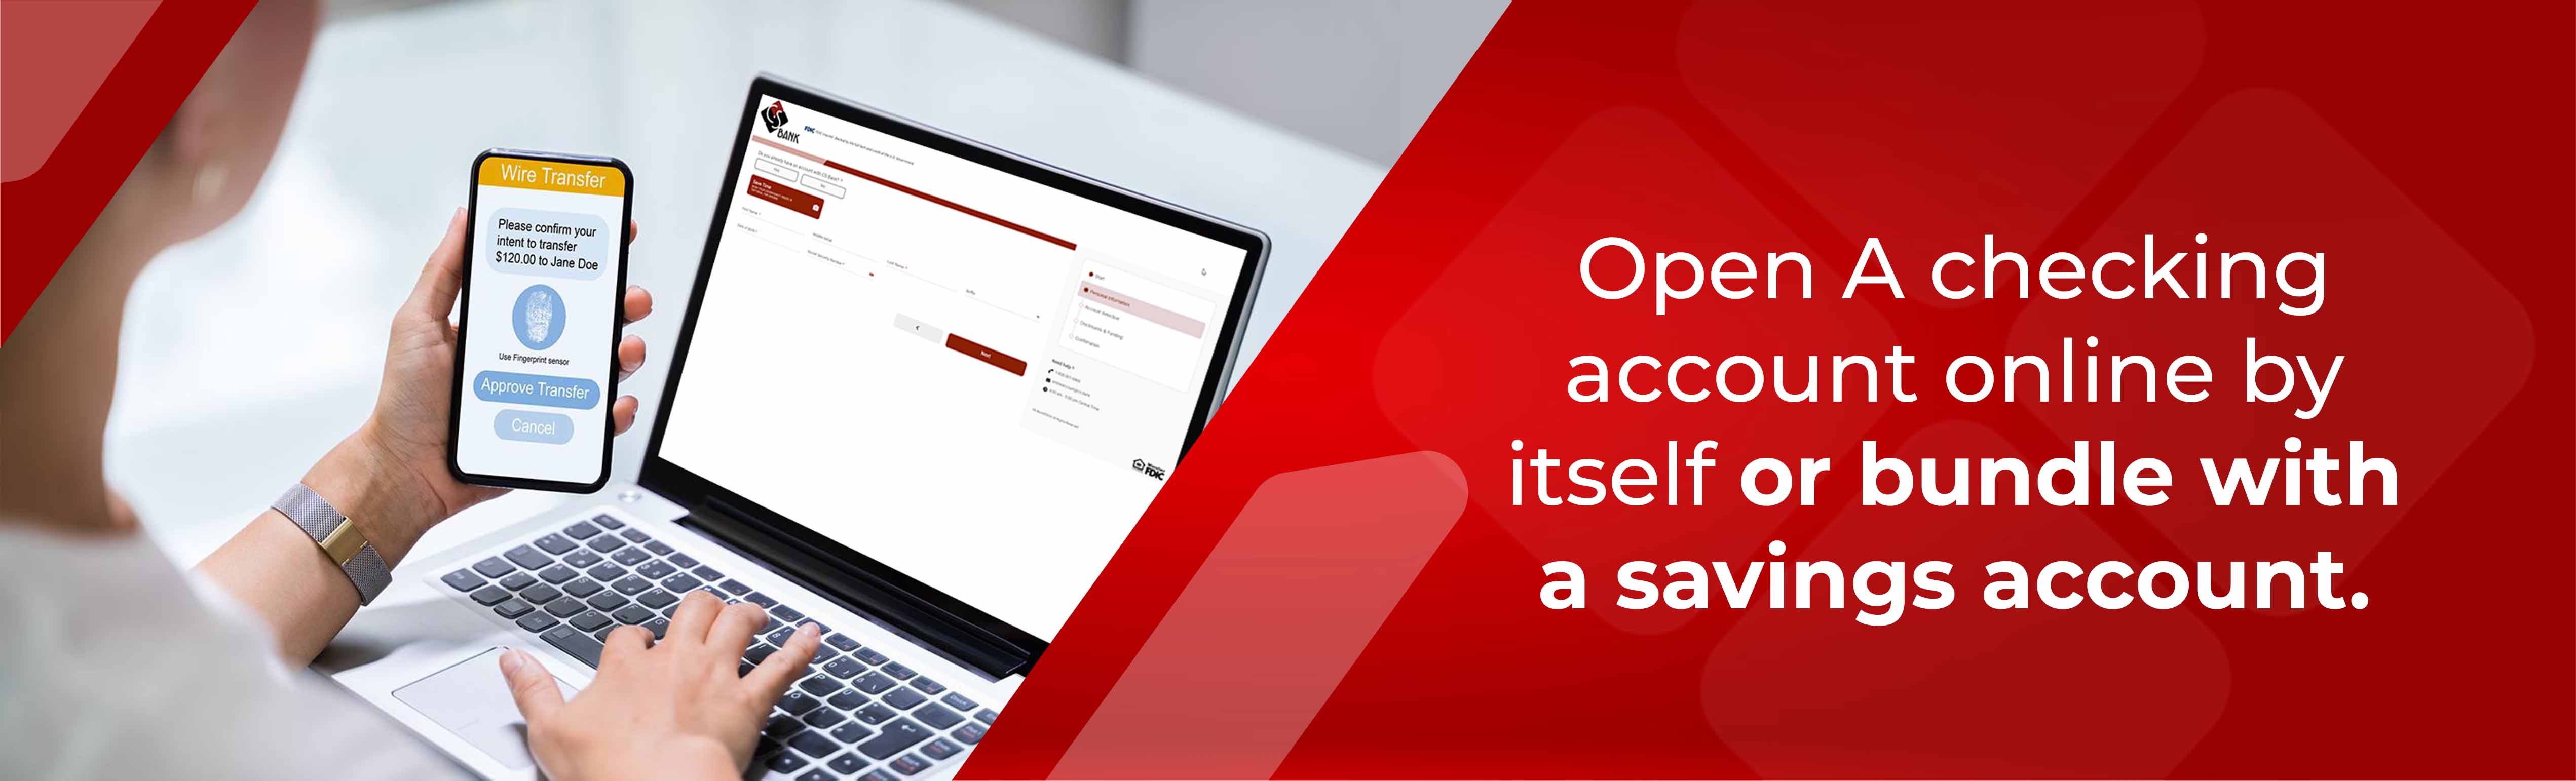 Open a checking account online by itself of bundle with a savings account.